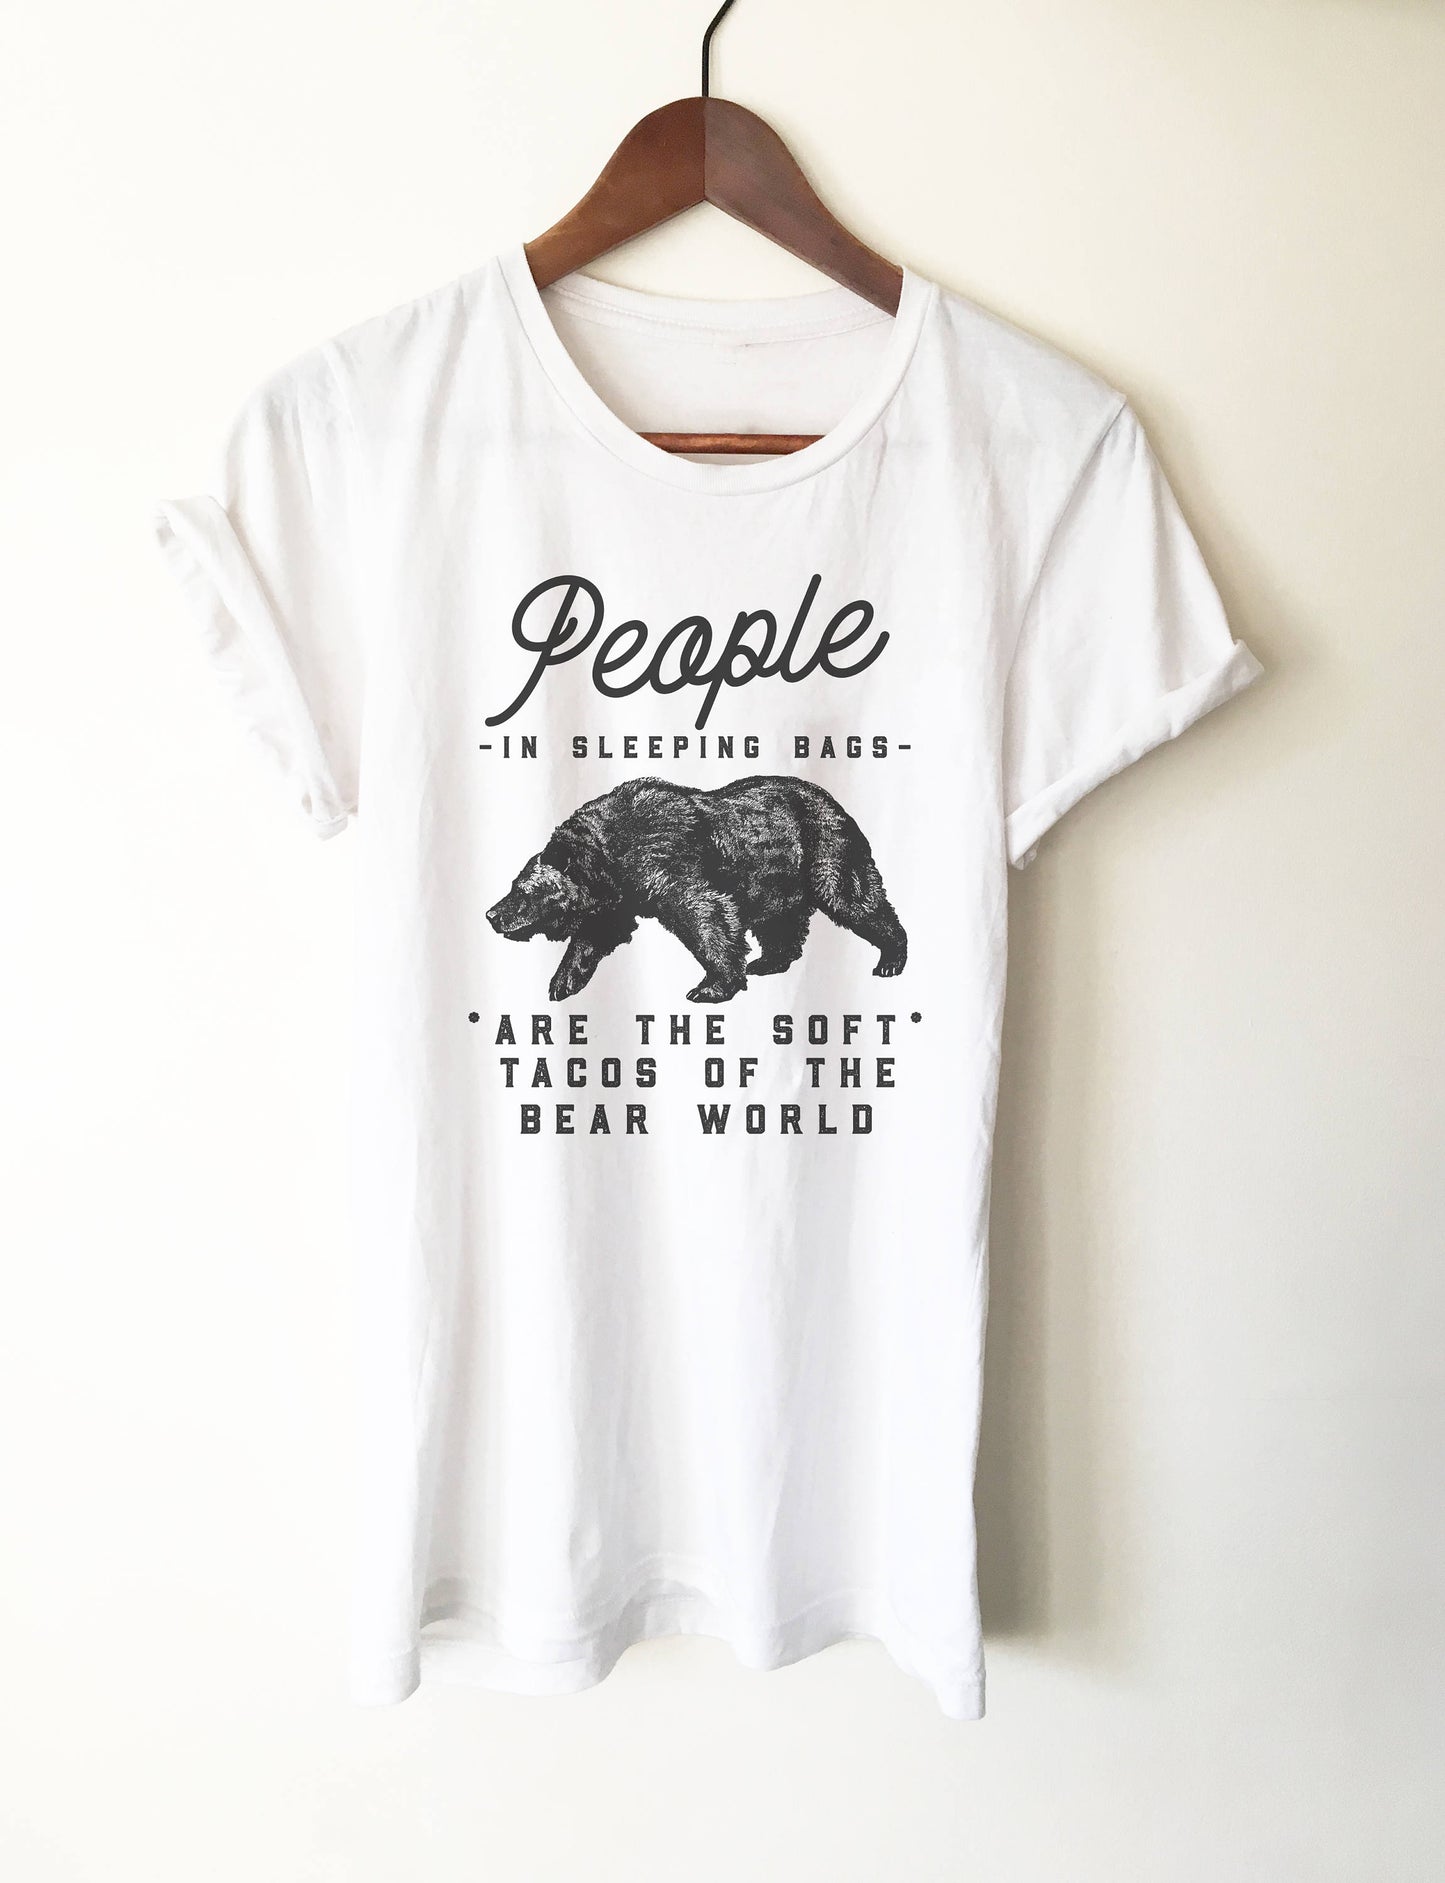 People In Sleeping Bags Are The Soft Tacos Of The Bear World Unisex T-Shirt - Mountain Bear Shirt - Taco Shirt - Camping Gift - Outdoors